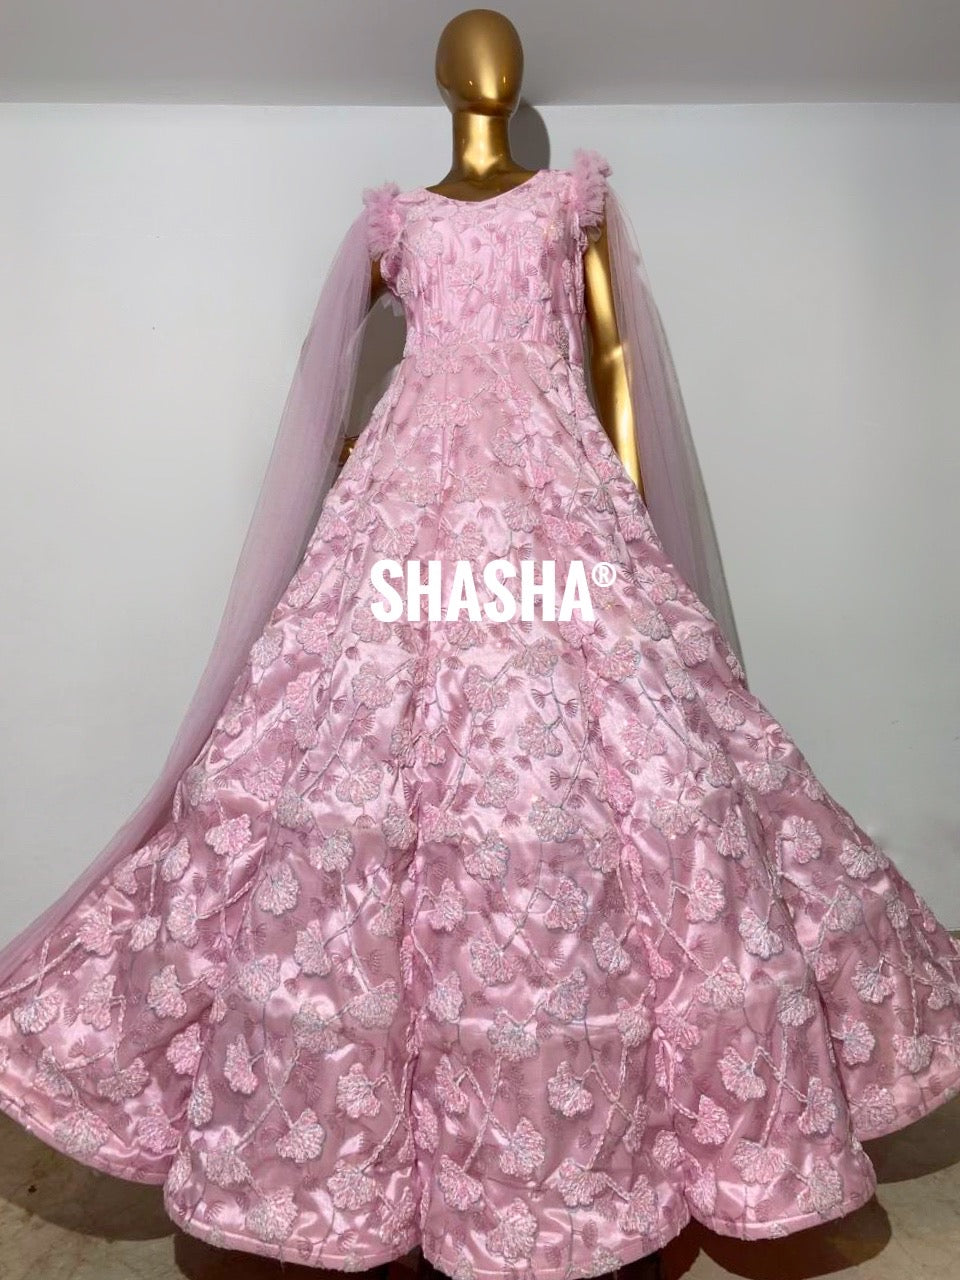 View Of Pink Garden Gown